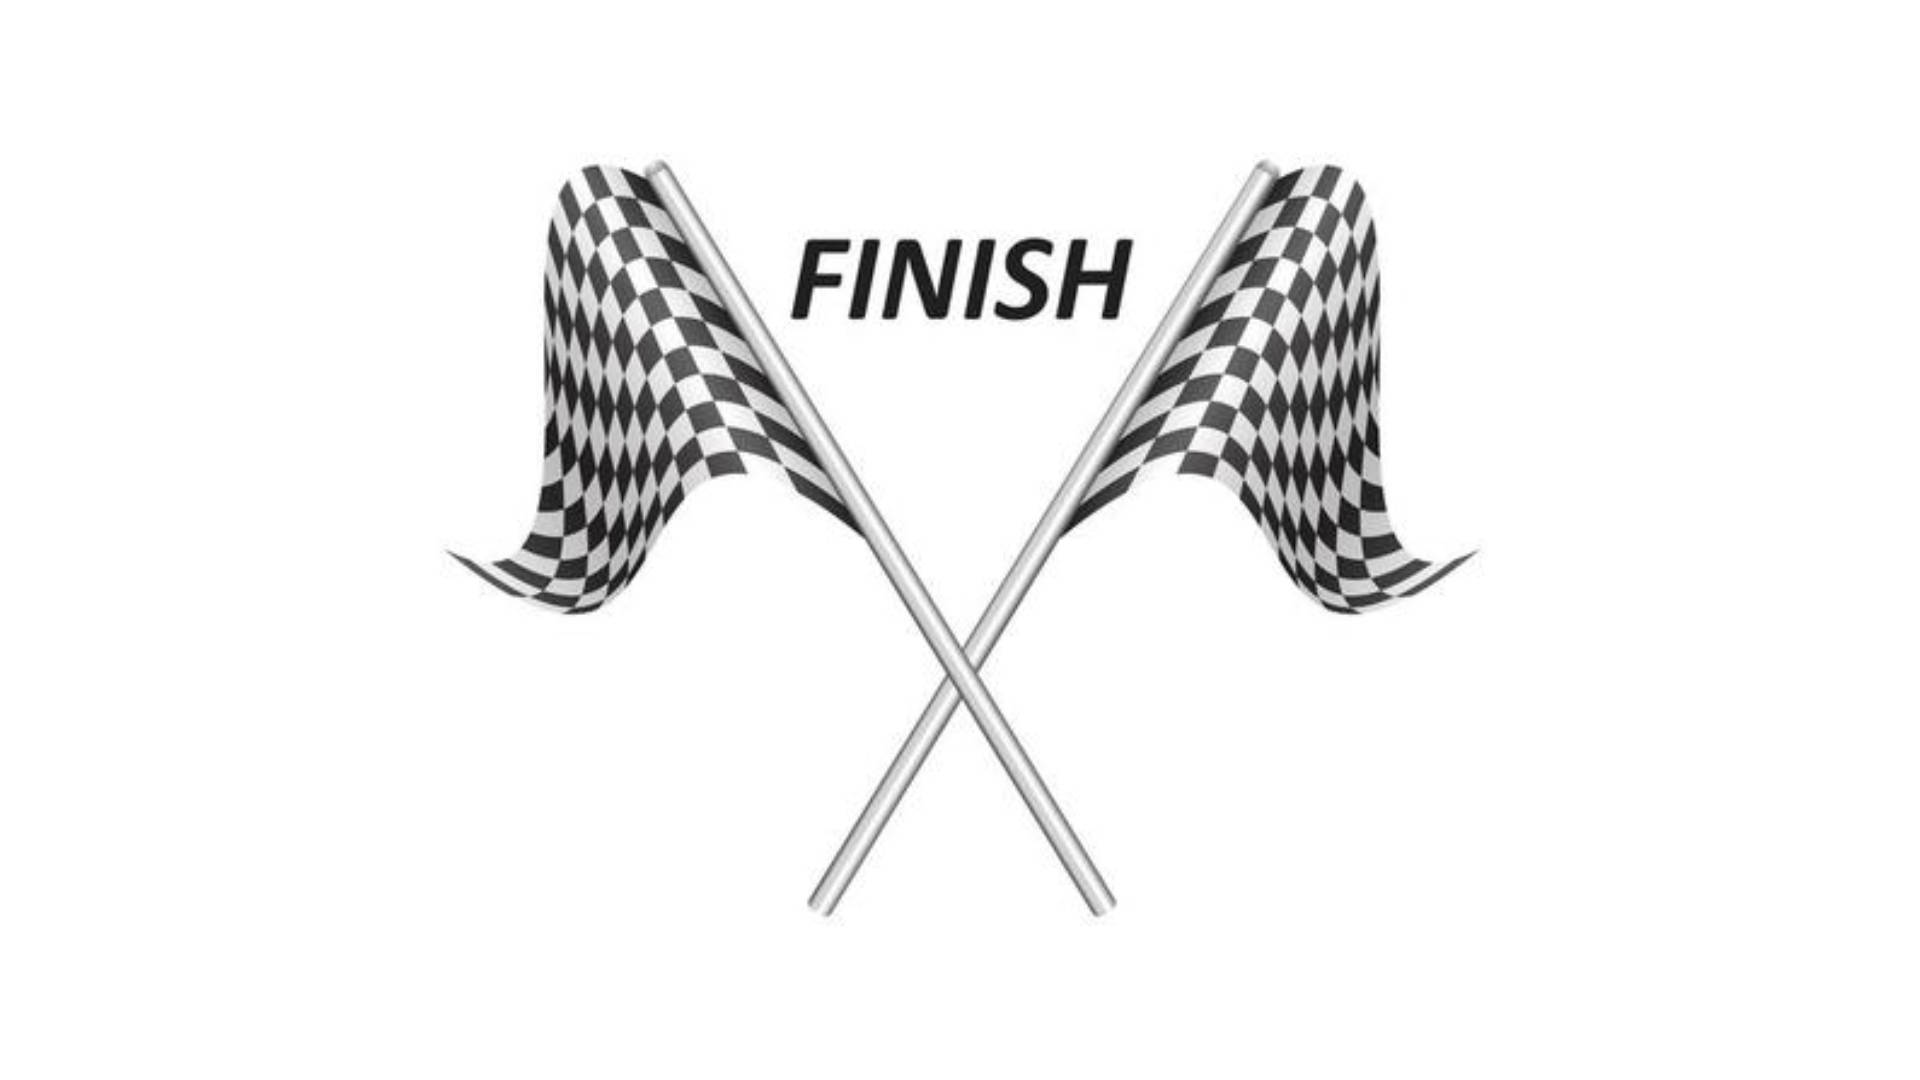 Finish Crossed Checkered Flags Wallpaper